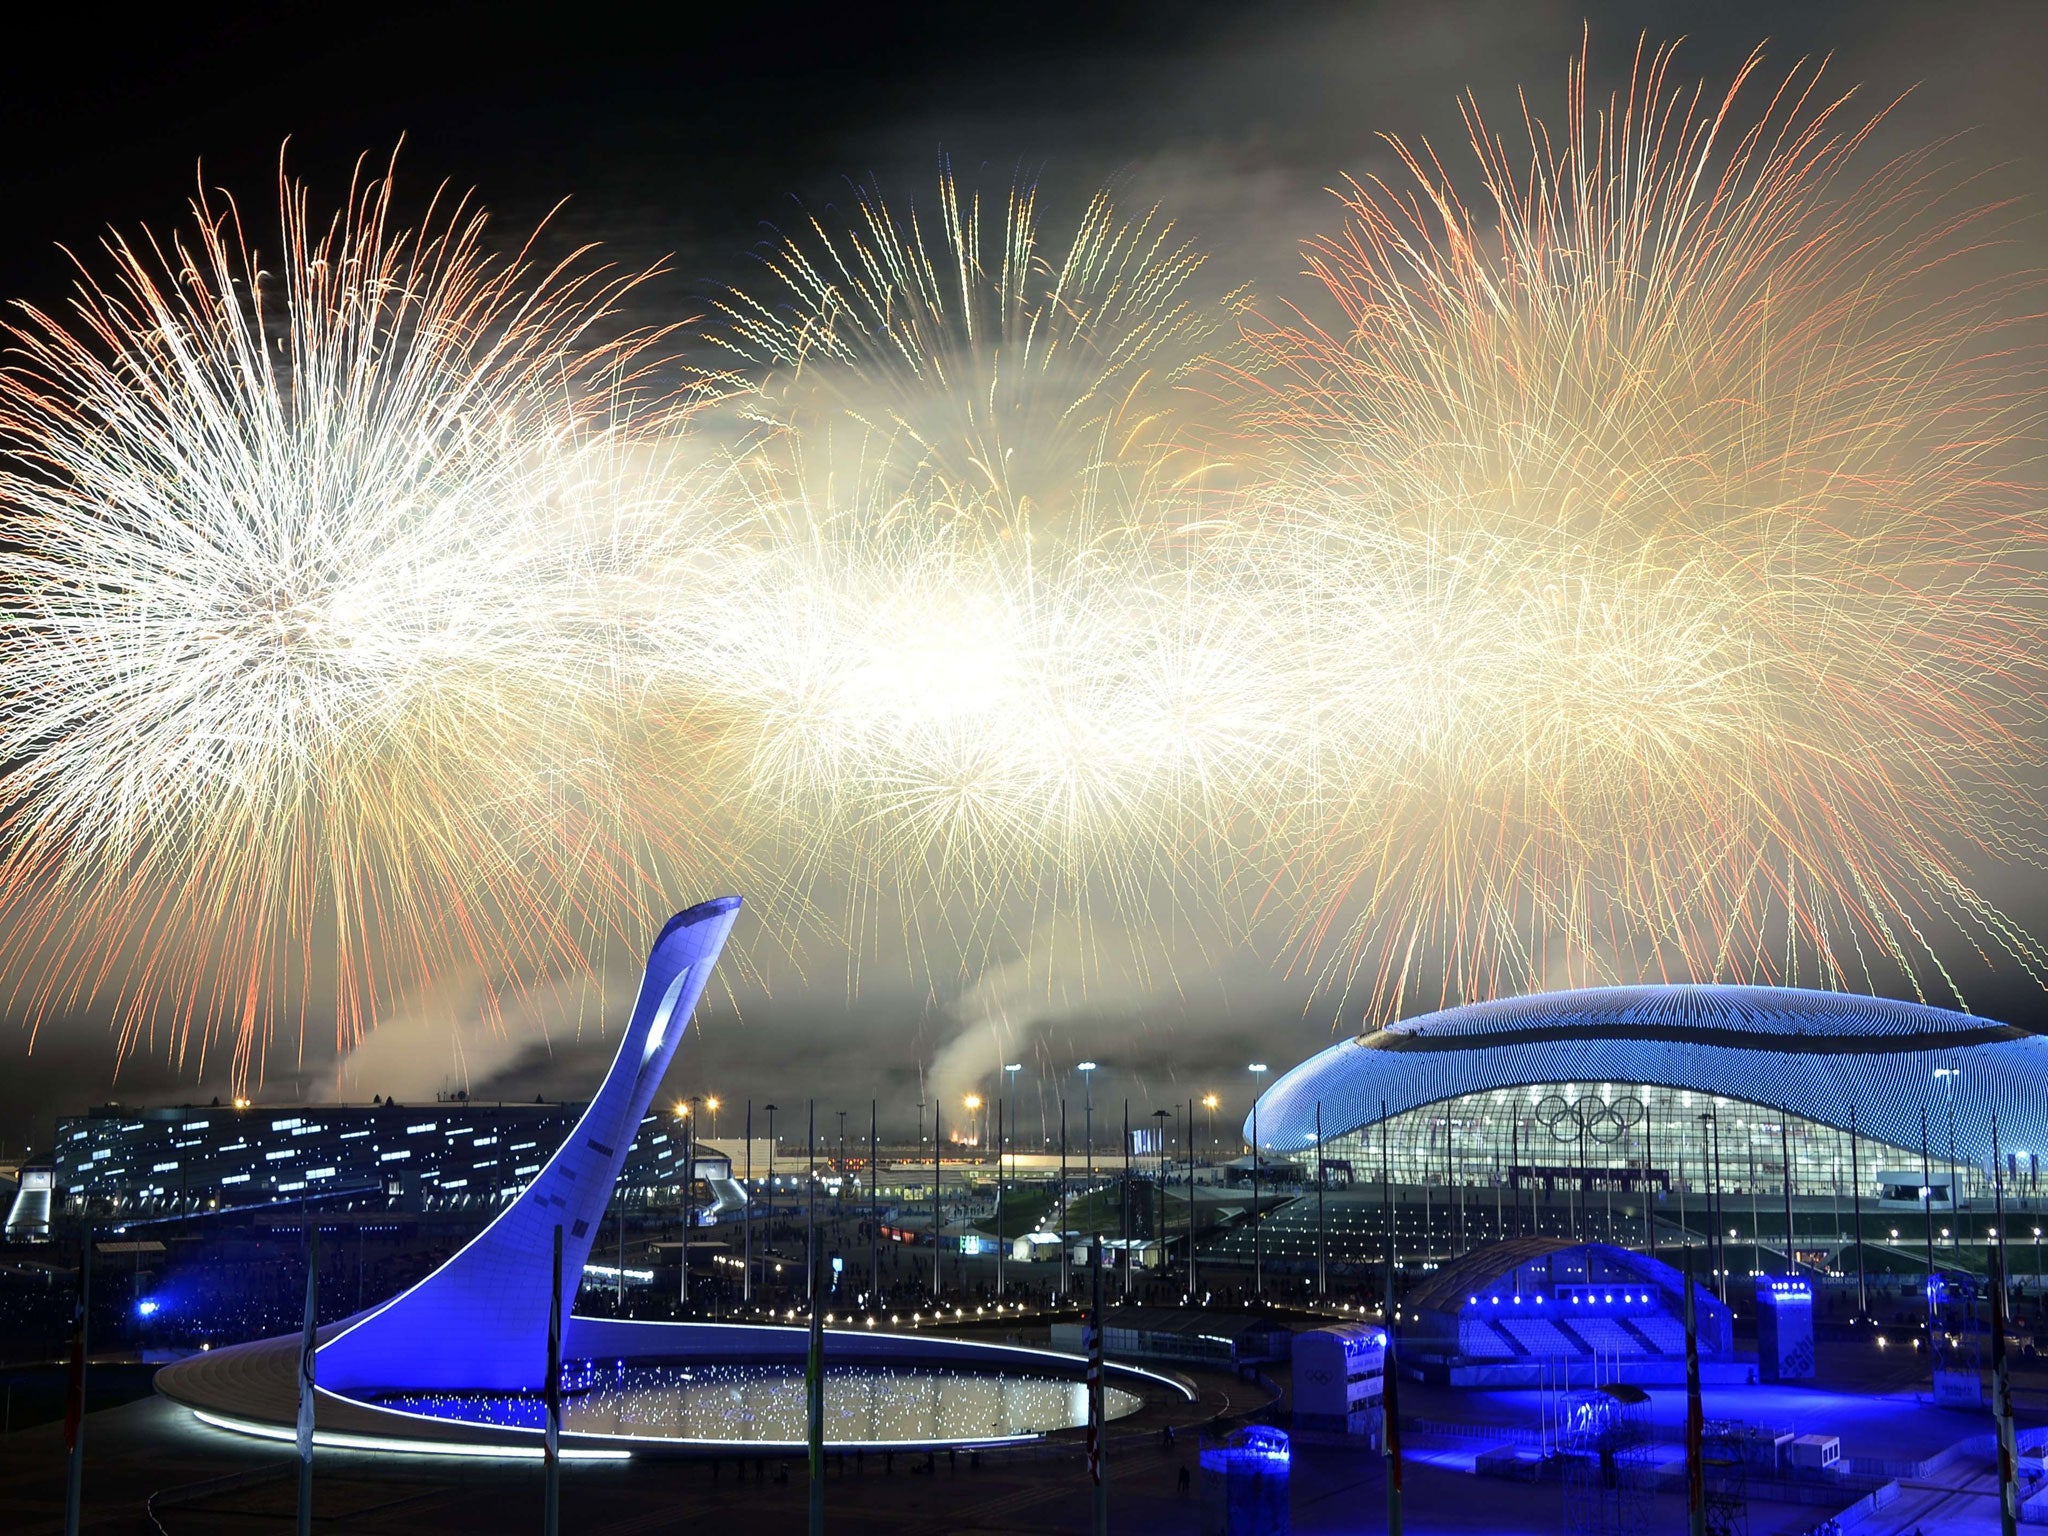 Fireworks explode around the Fisht Olympic Stadium at the end of the Closing Ceremony of the Sochi Winter Olympics at the Olympic Park in Sochi